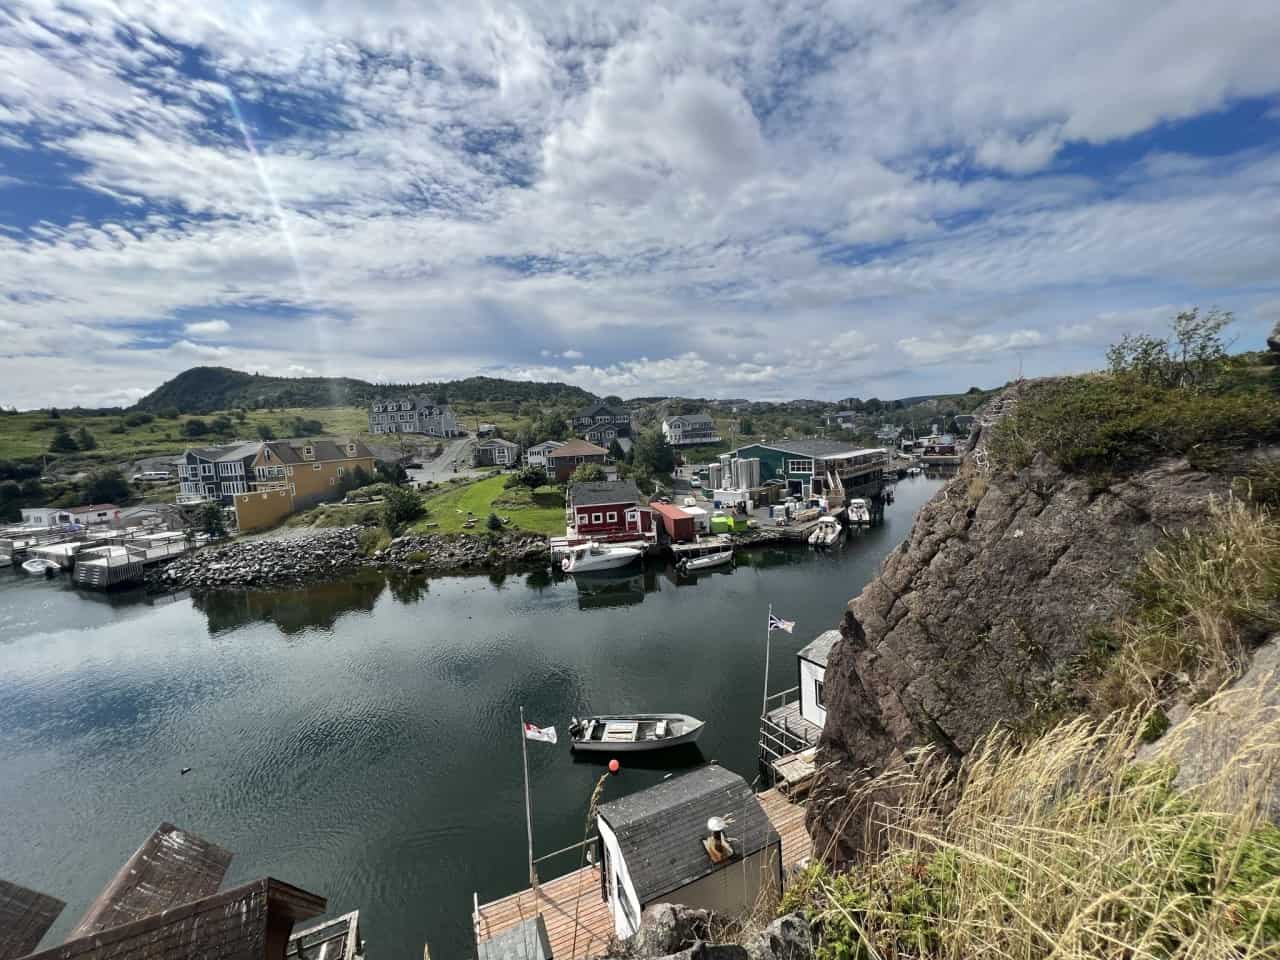 Quidi Vidi Village near Sugar Loaf Path on the East Coast Trail Newfoundland - The view from the trail overlooking Quidi Vidi Village shows local fishing huts that are still being used, local homes and the Quidi Vidi Brewery. The brewery is a great location for a refreshing drink at the end of the long hike. In the summertime there are also various food trucks and a beer tent on The Wharf. 